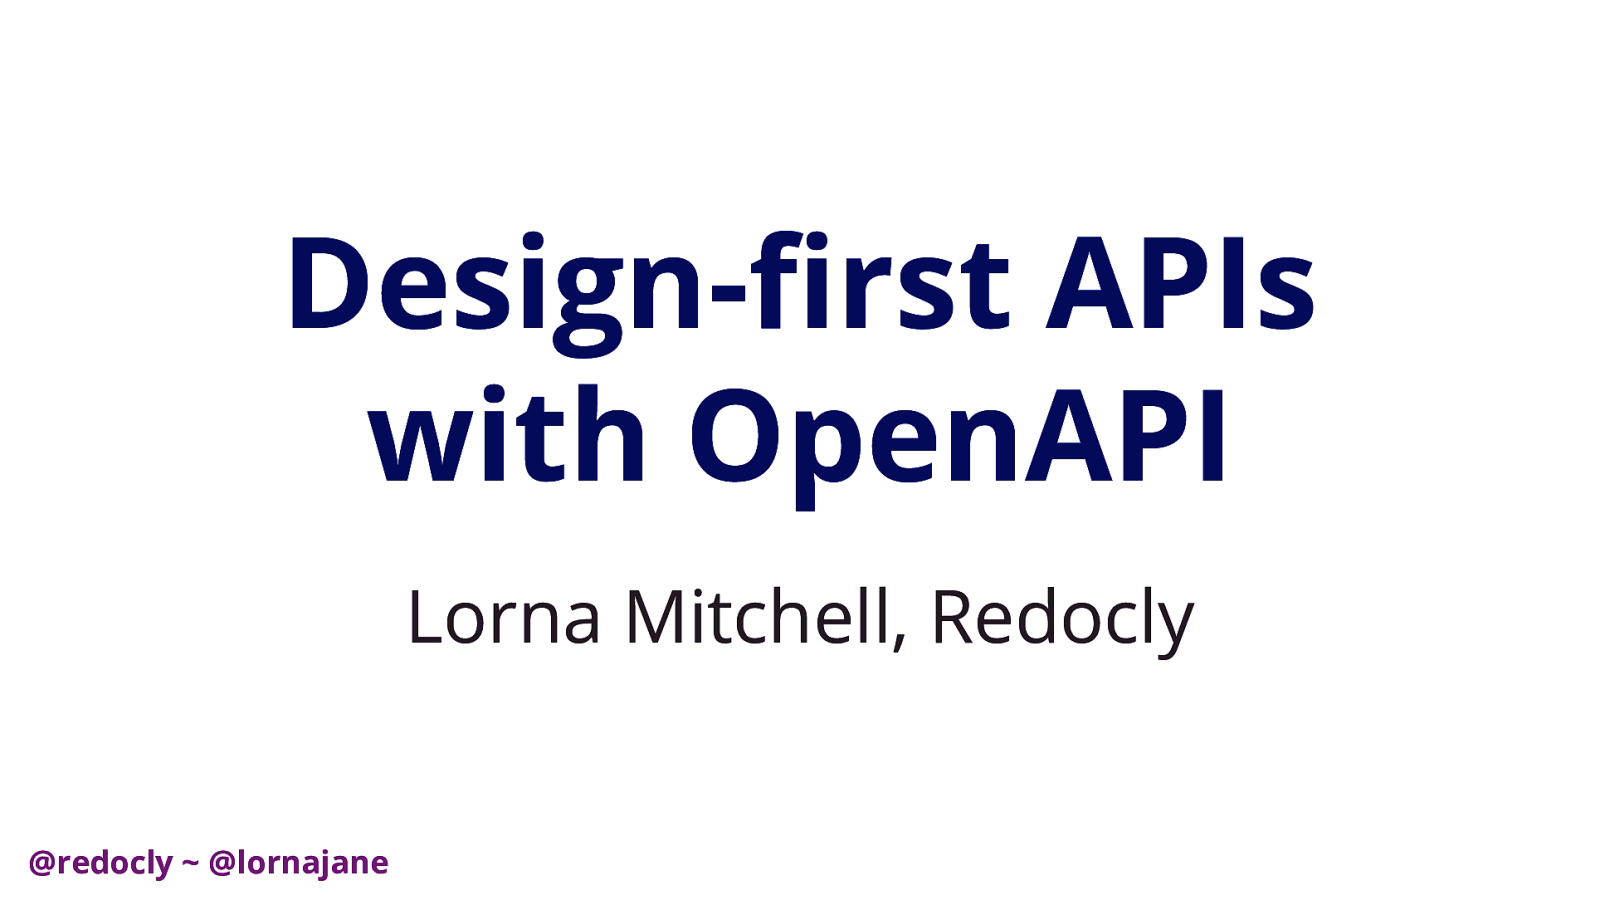 Design-first APIs with OpenAPI